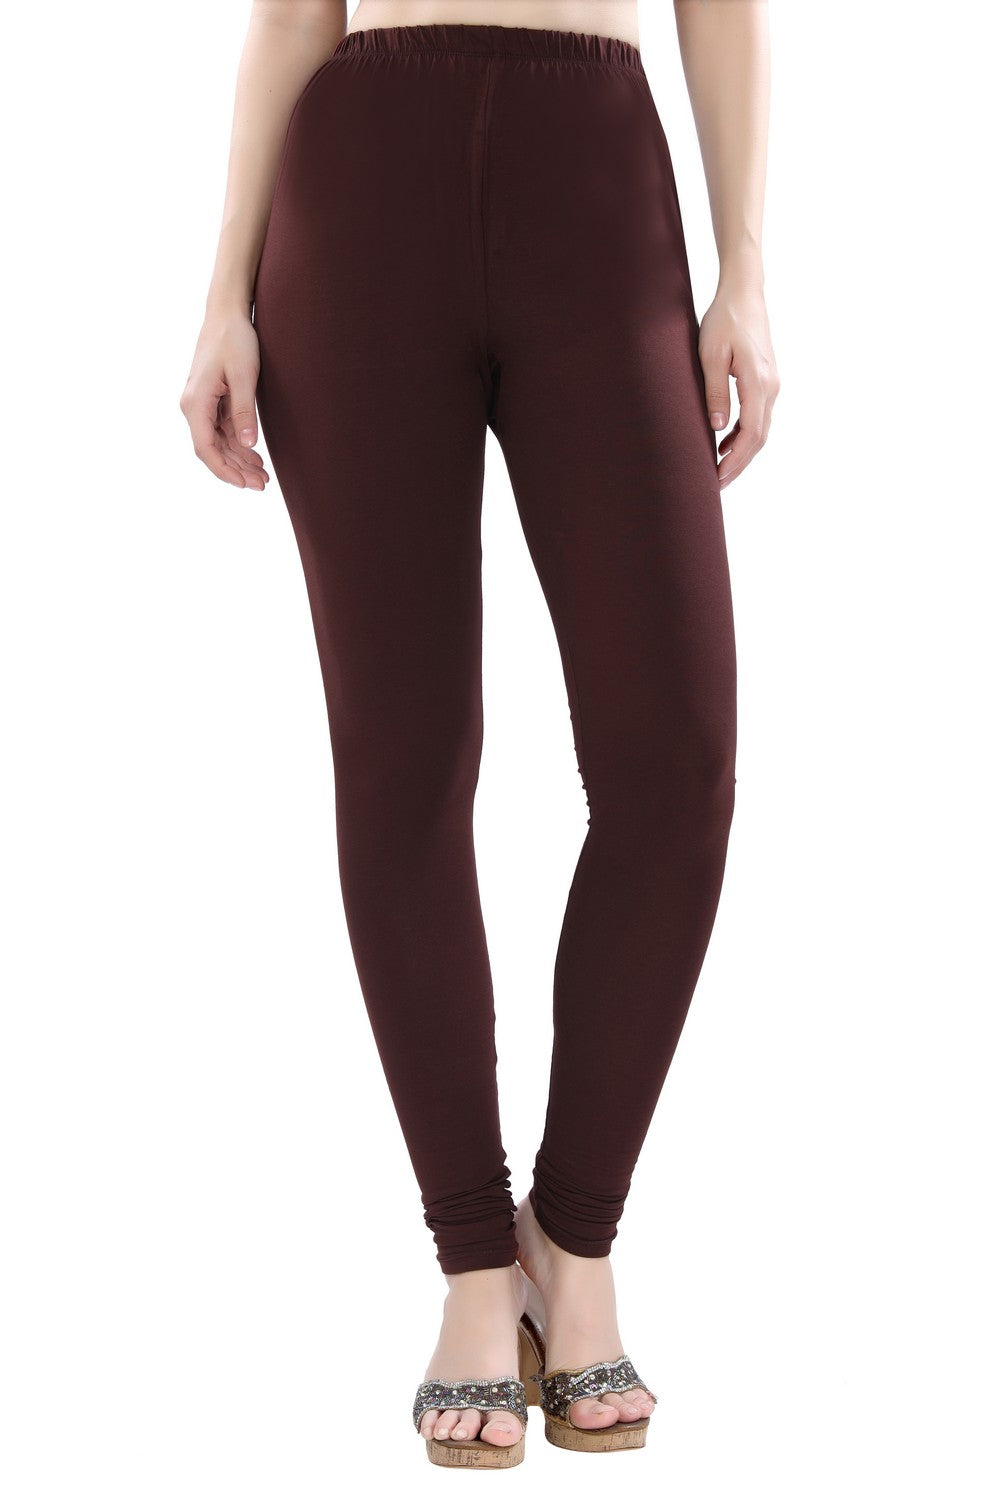 Sand Brown Ladies' Tights, Solid Color Print Women's Dressy Long Casual  Leggings- Made in USA